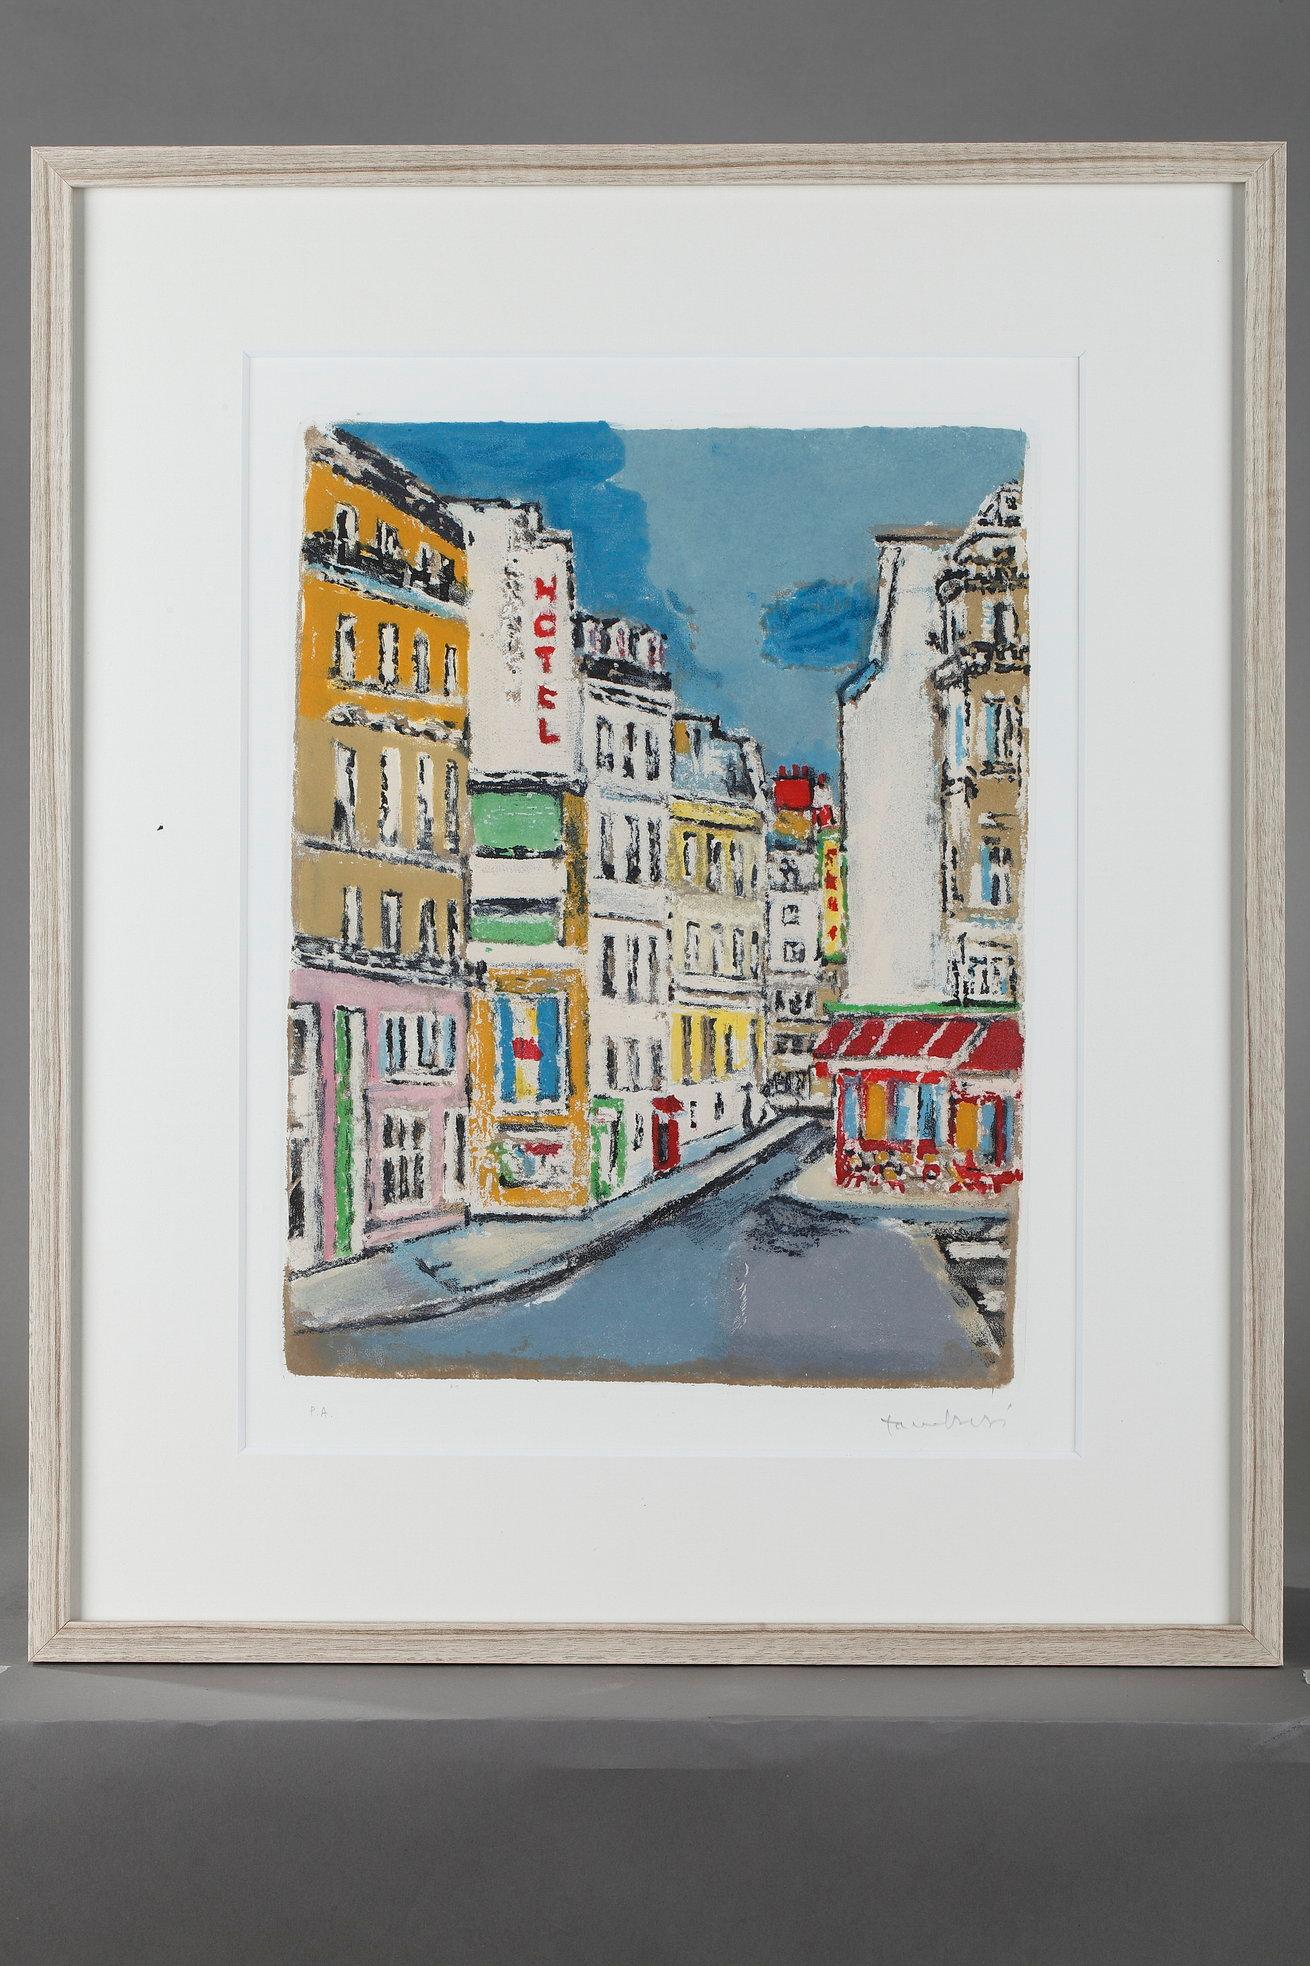 Engravings by Orfeo Tamburini representing the districts of Paris for the series Paris 20+1 realized with etching and aquatint in colors. They are signed in pencil by the artist and published between 1979 and 1981 by Il Cigno in Rome. The stamp is